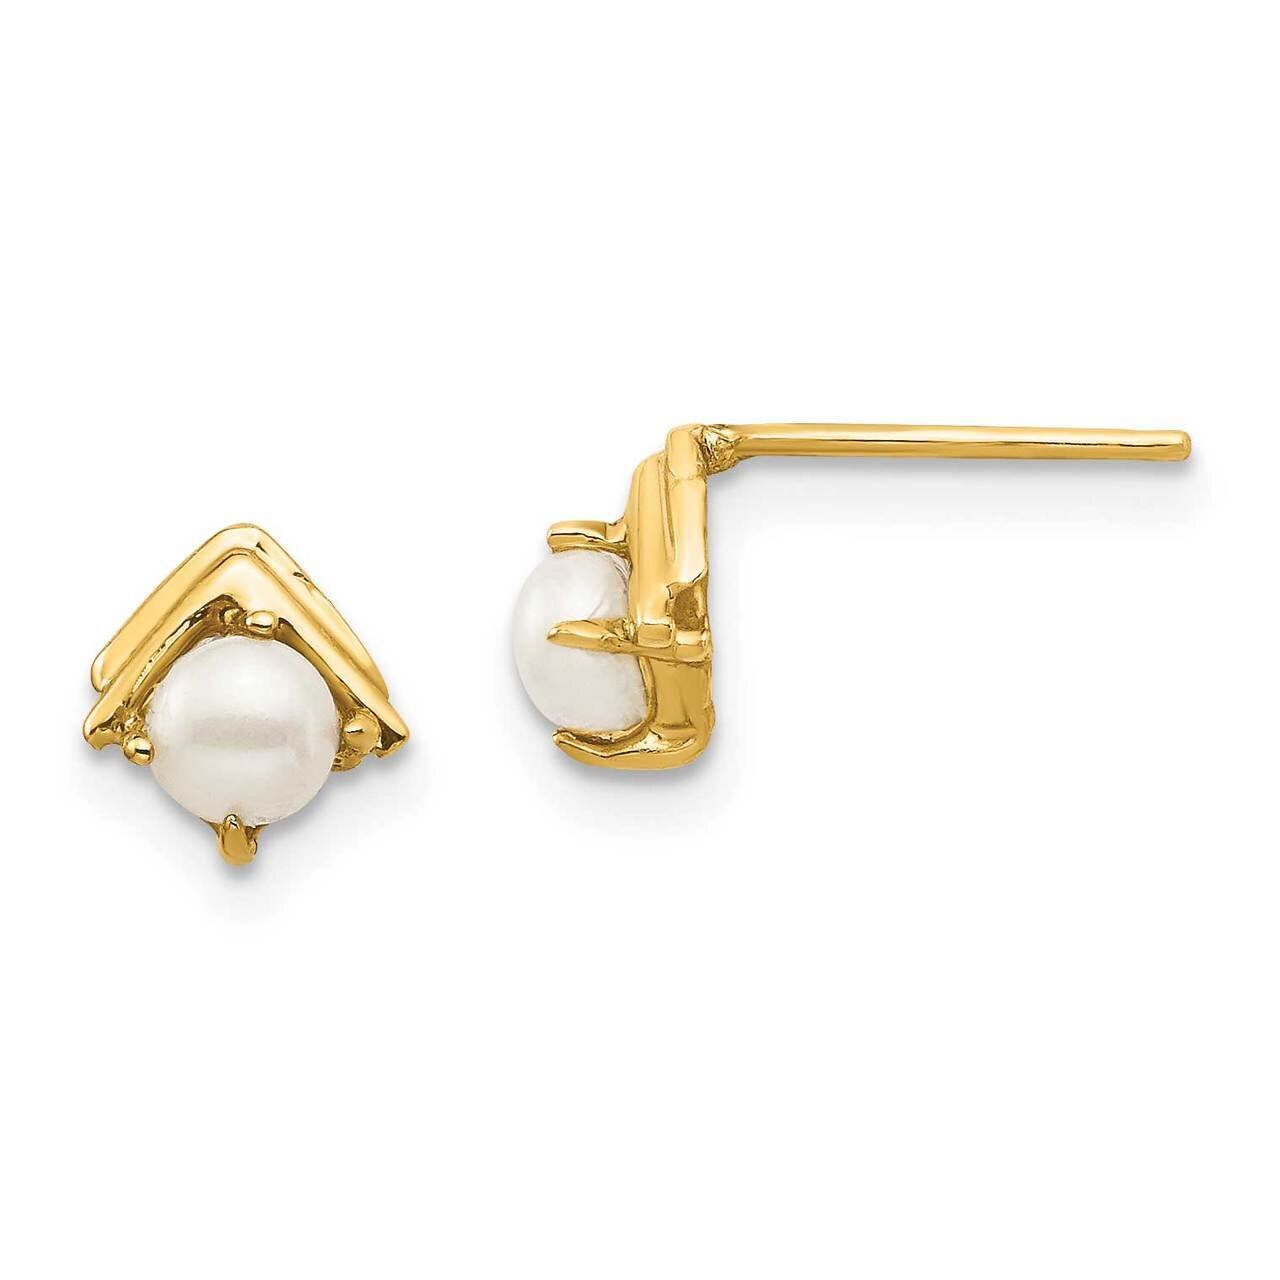 3-4mm White Button Freshwater Cultured Pearl Post Earrings 14k Gold SE2953